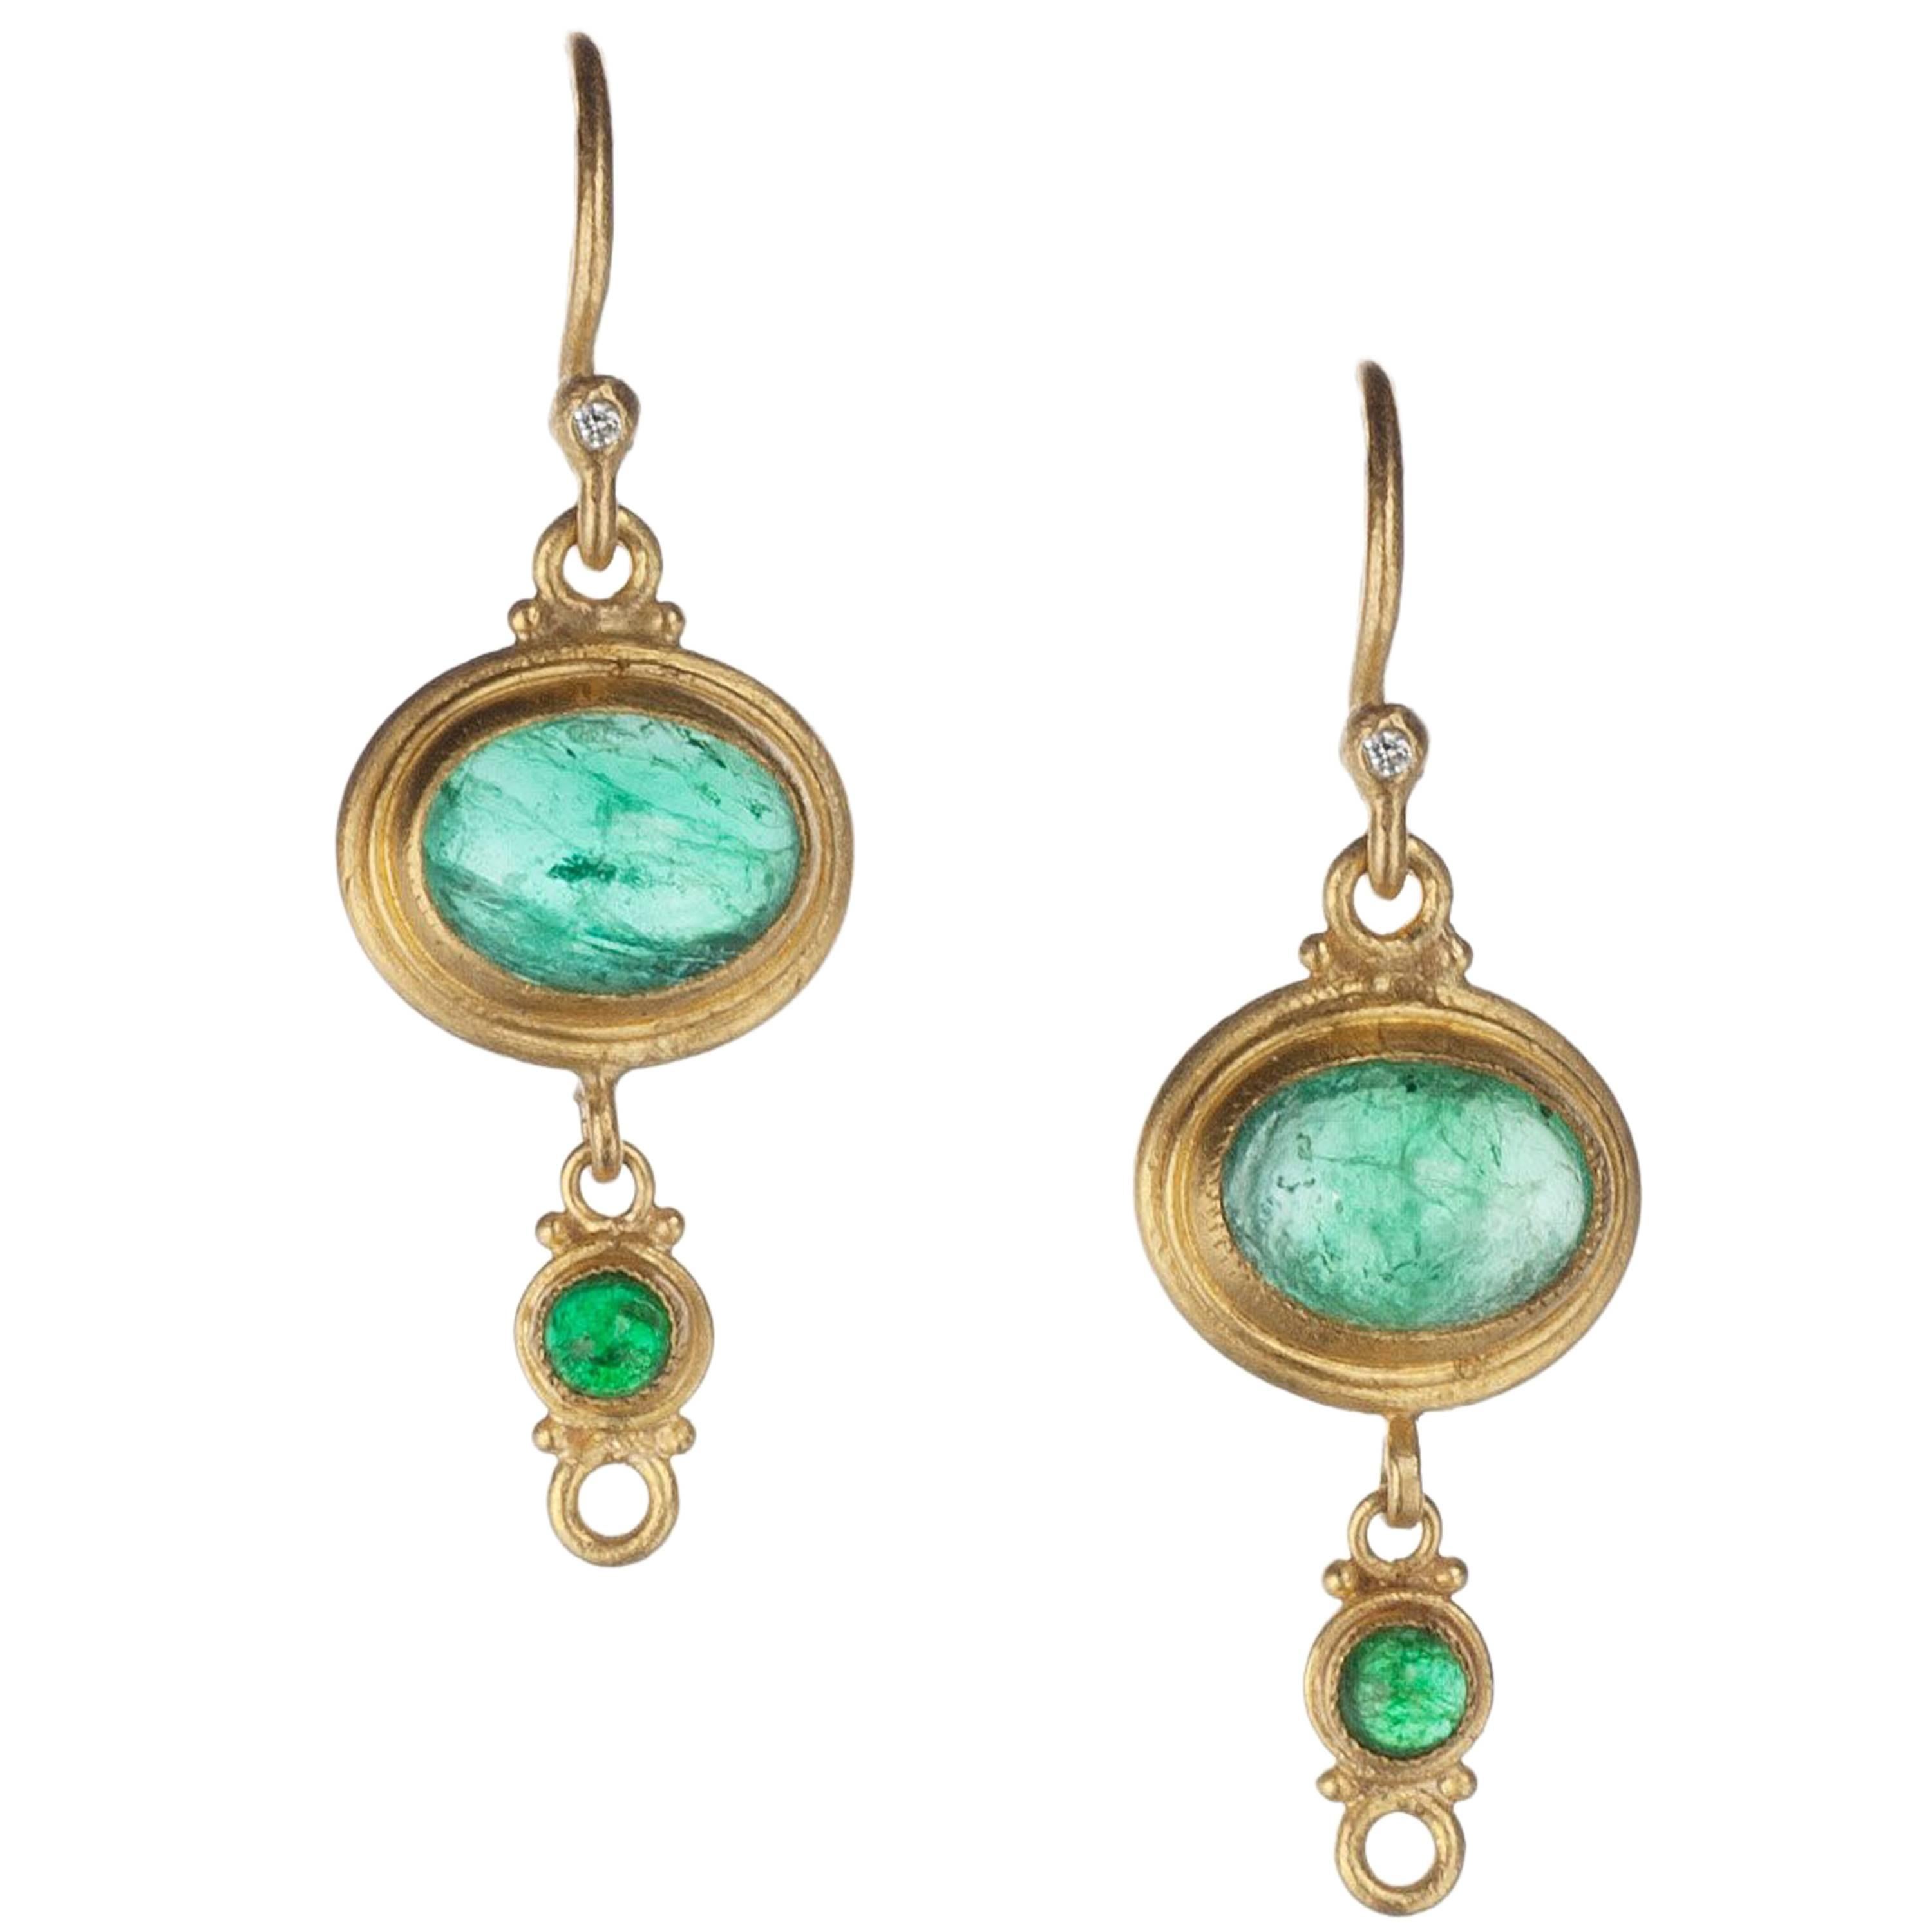 Lika Behar “Reflections” Emerald and Diamond Drop Earrings in 24 and 22 Karat For Sale